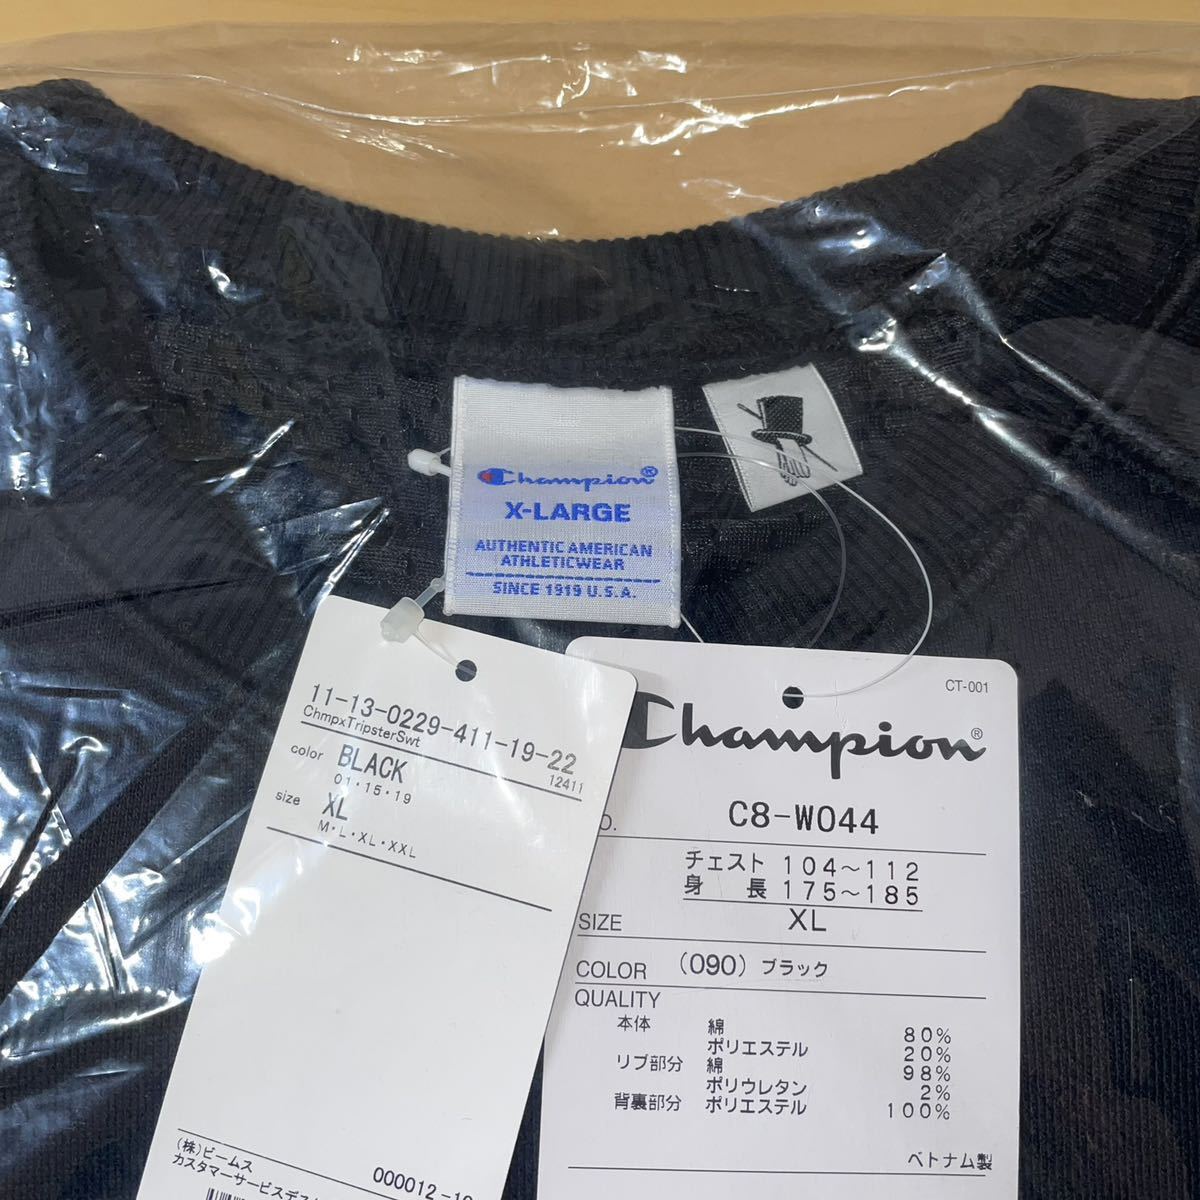 XL 黒 チャンピオン 野村訓市 クルーネック スウェット シャツ トレーナー Champion for BEAMS Exclusive by  TRIPSTER ラスト1